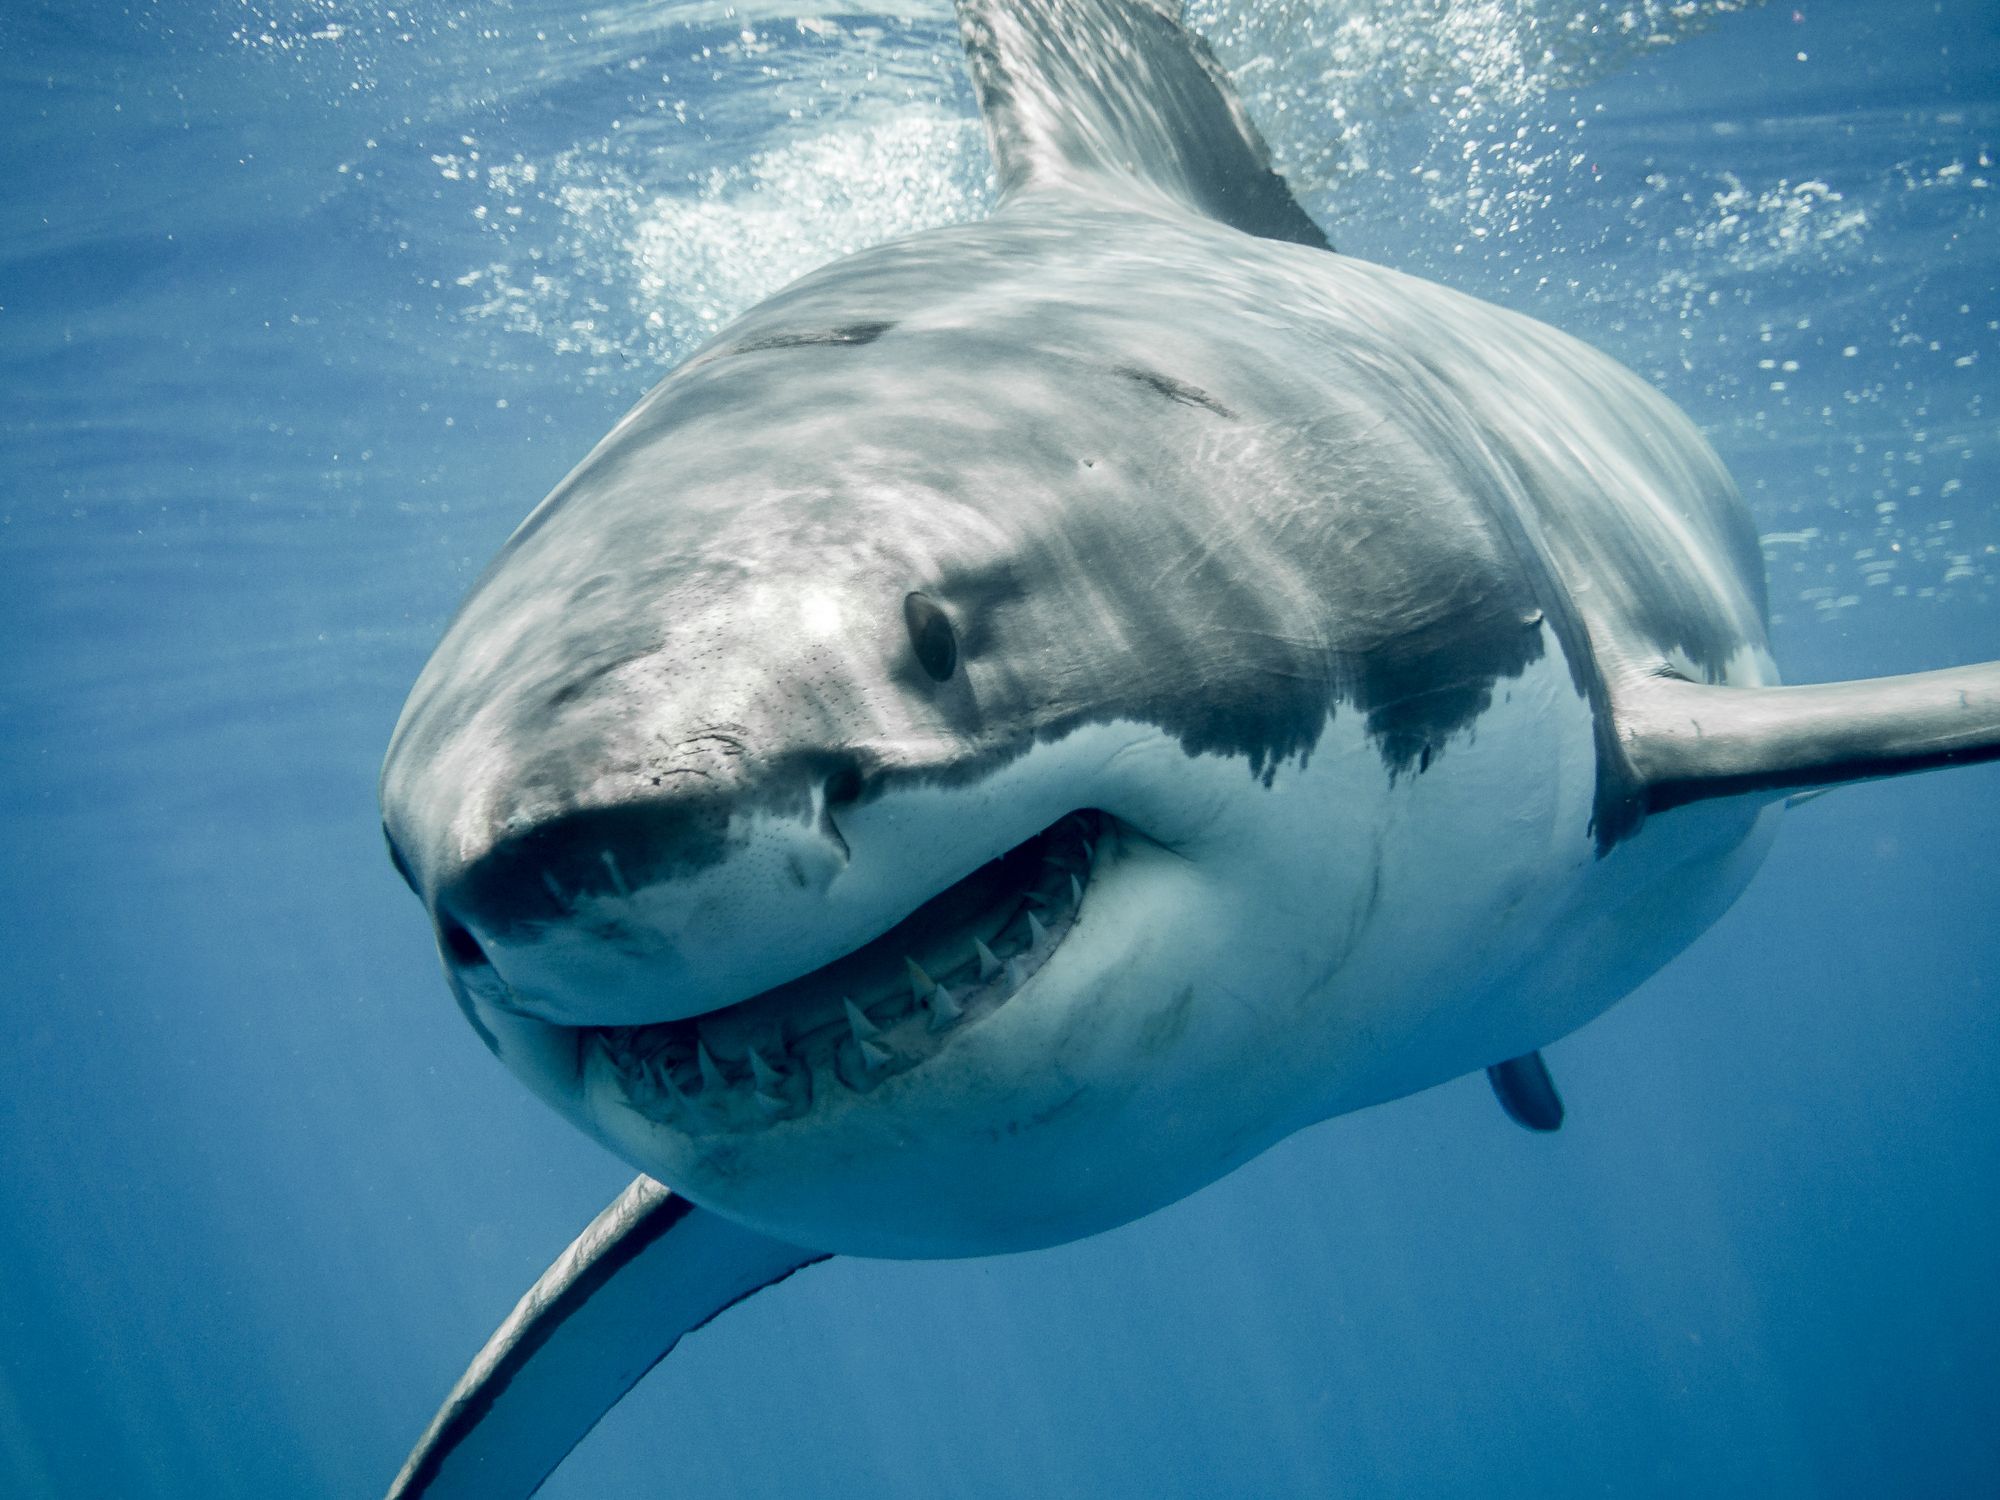 Deep Blue, the Massive, 20ftlong Great White Shark Thought to Be